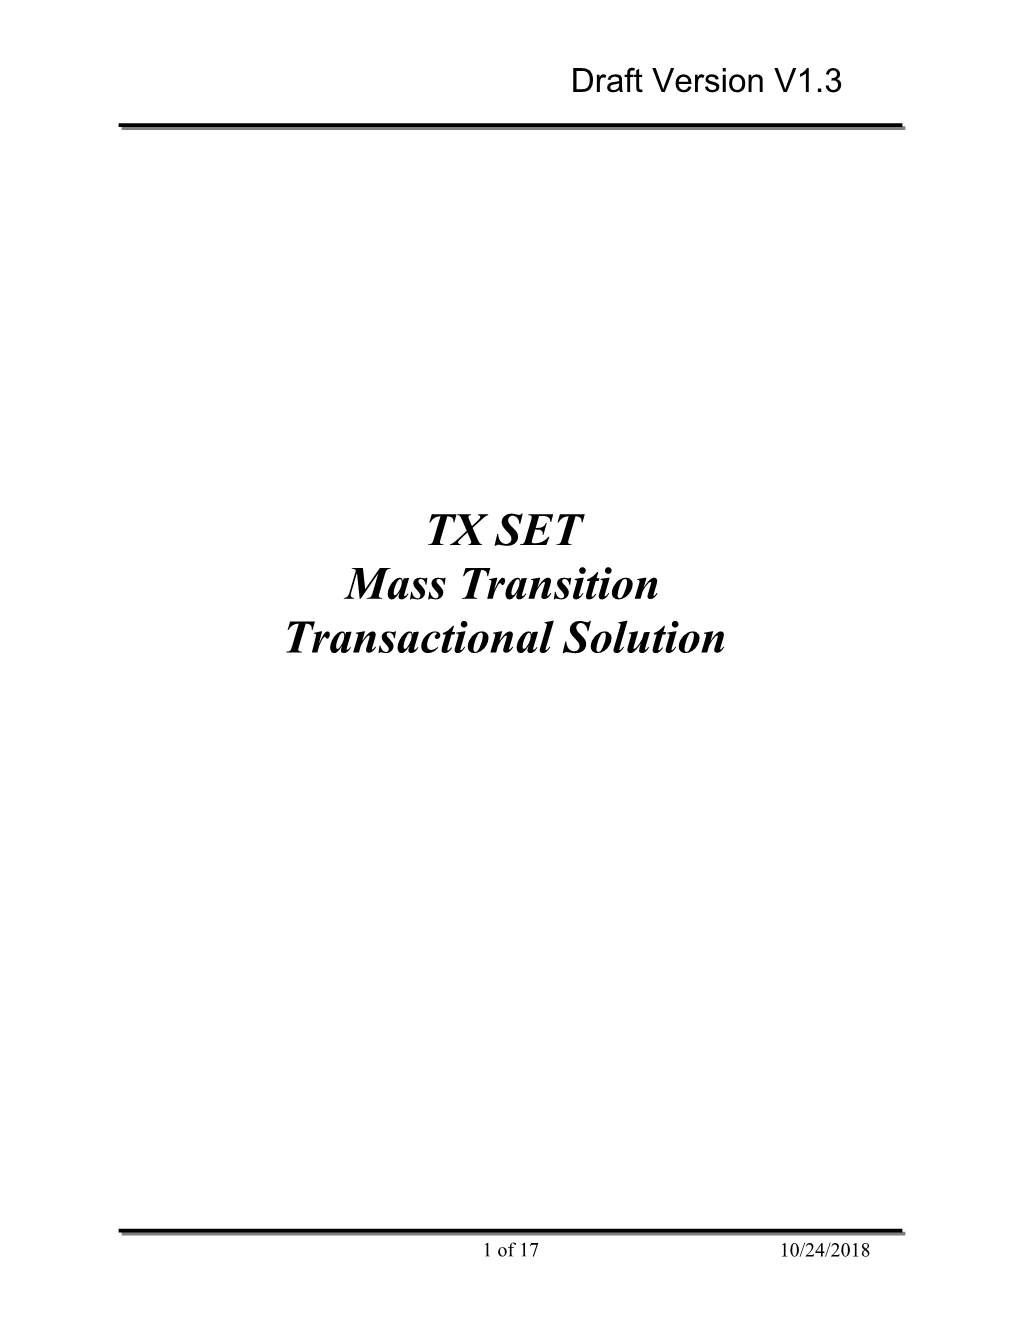 Mass Transition Requirements